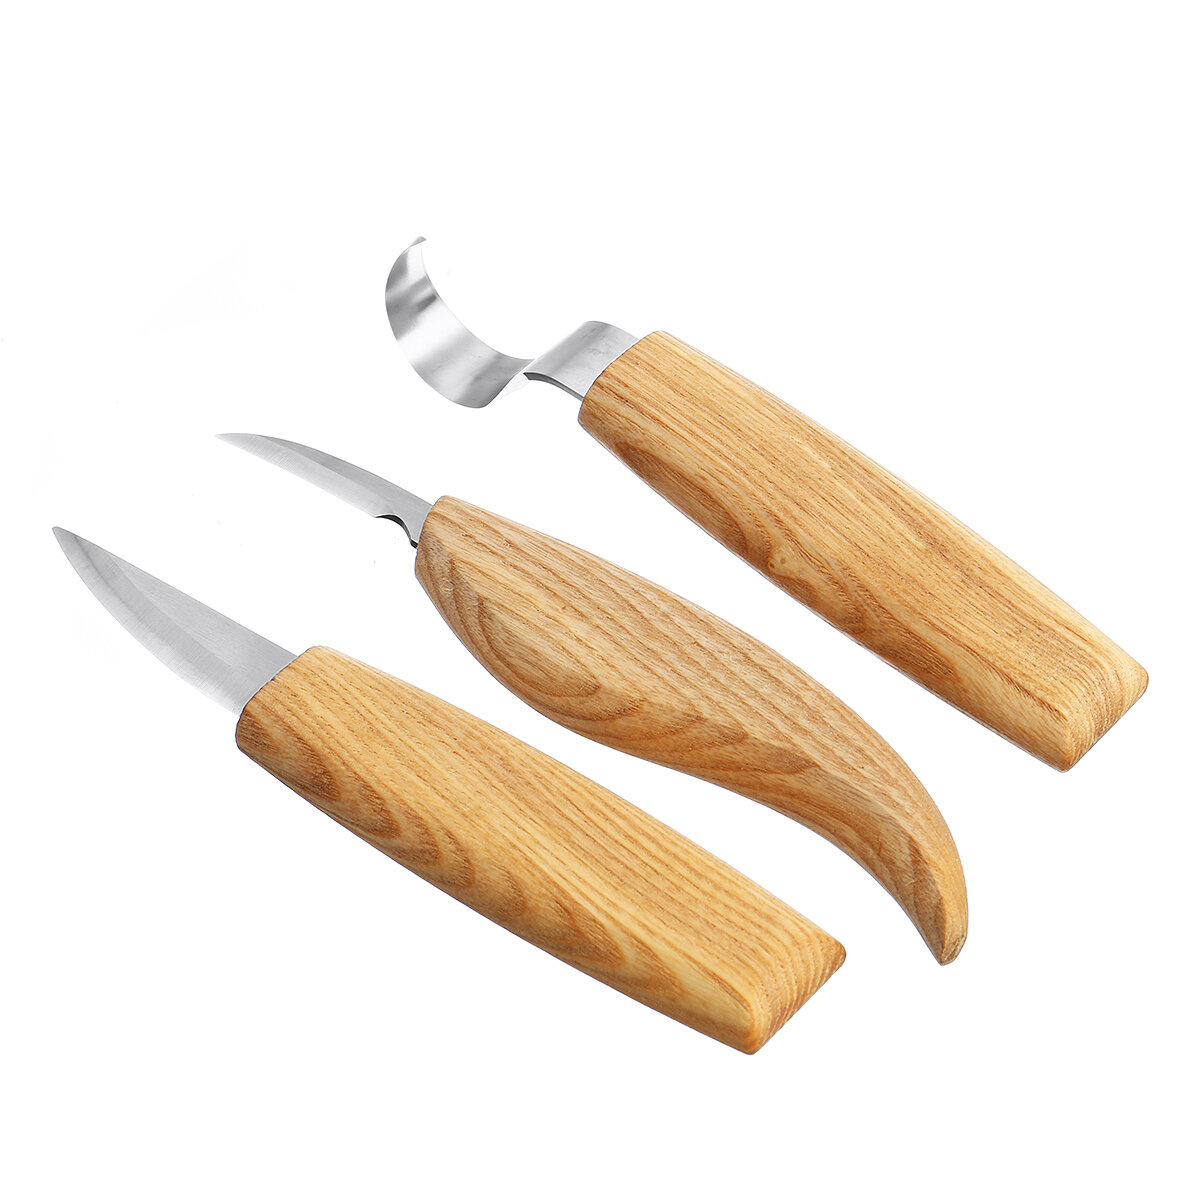 

Woodcarving Cutter Woodwork Carving Knive TOP SET Sculptural DIY Spoon Carving Knive Tool Whittling Beaver Craft Wood Ca